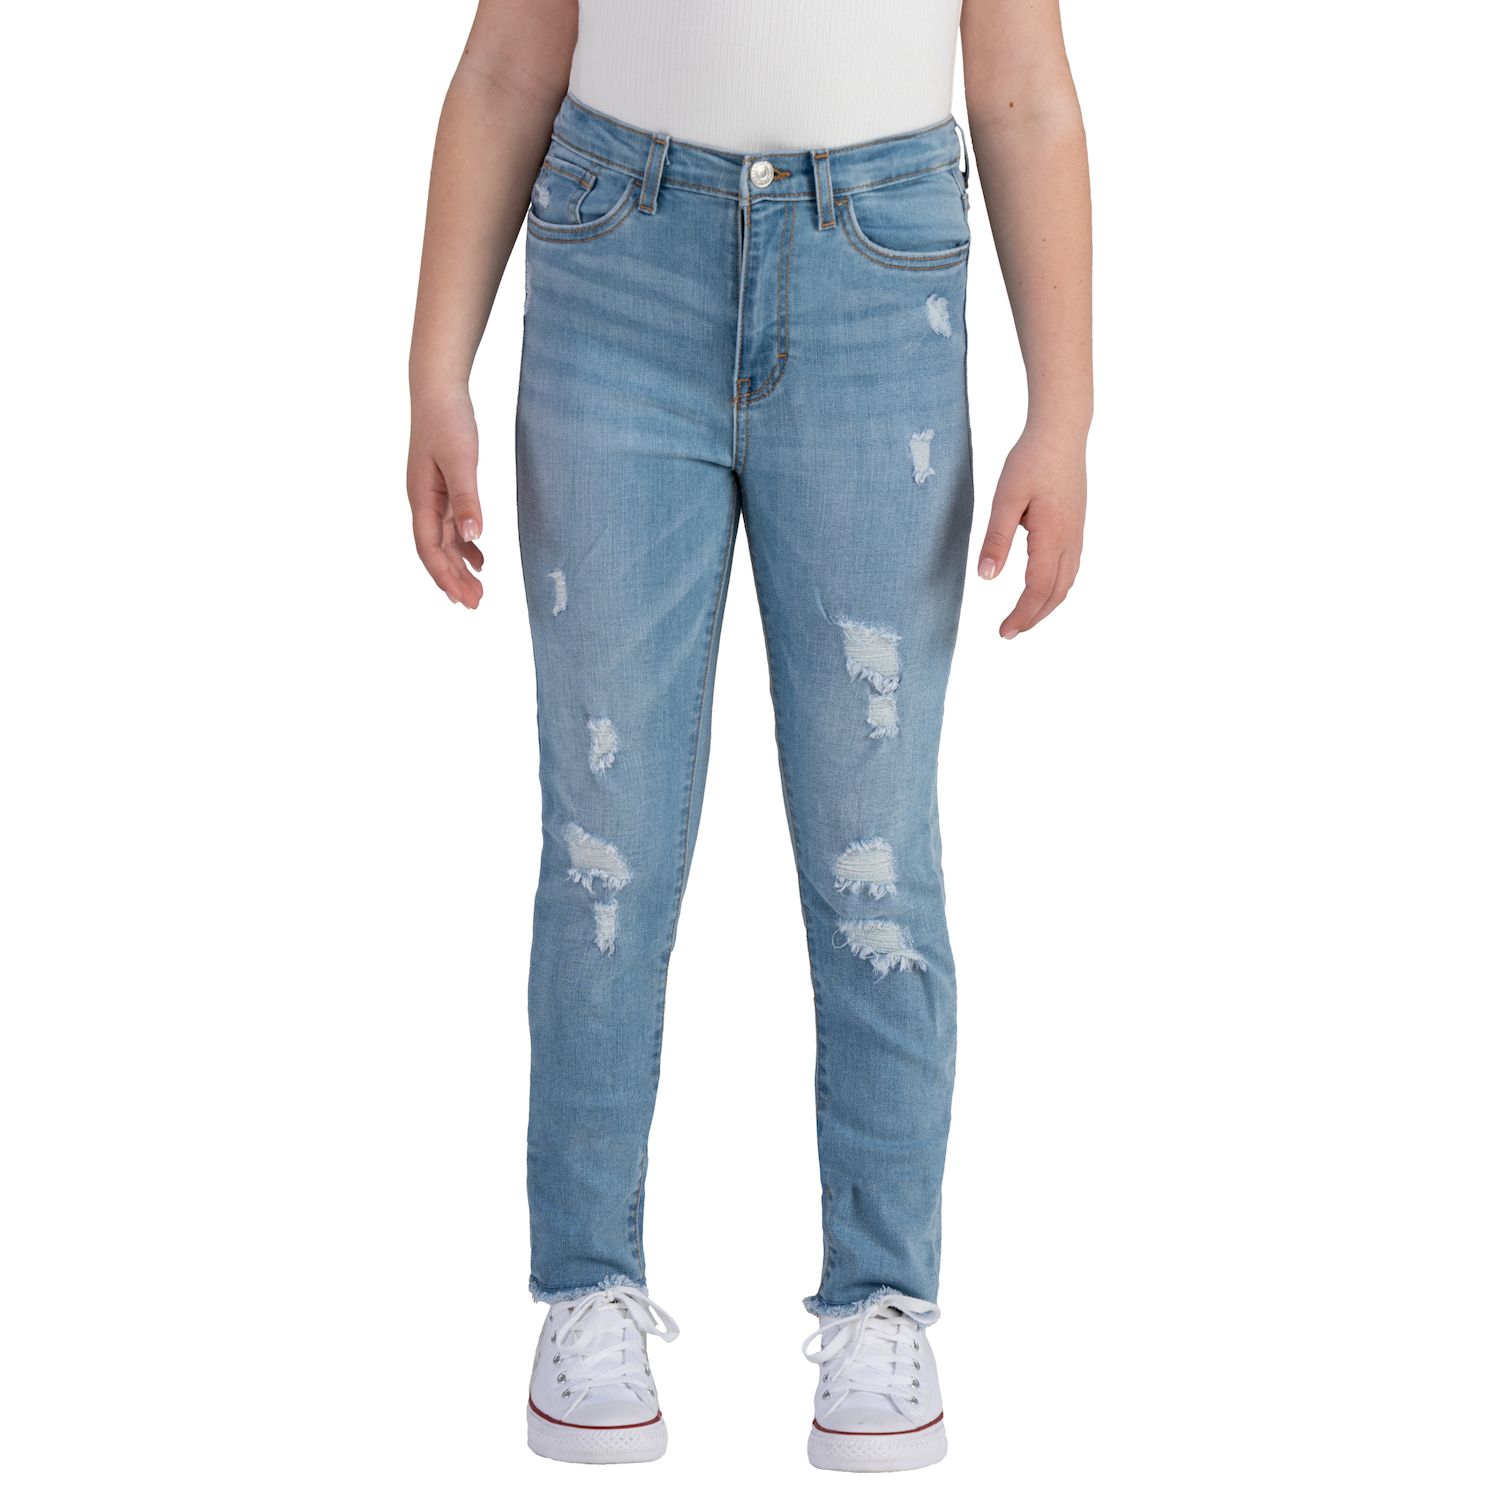 jeans for girls under 300